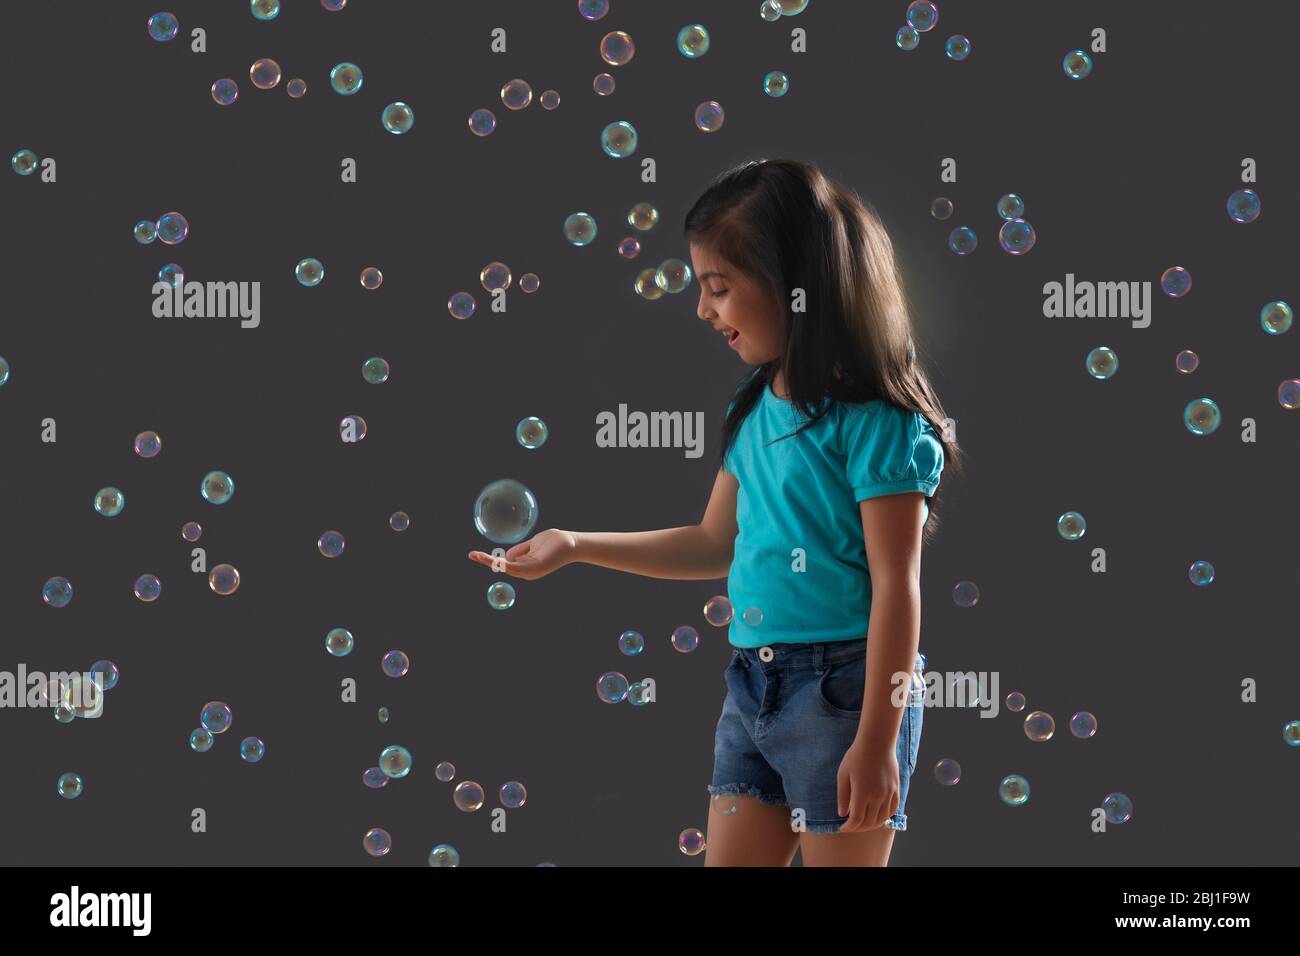 portrait of a young girl holding a bubble in her hand Stock Photo